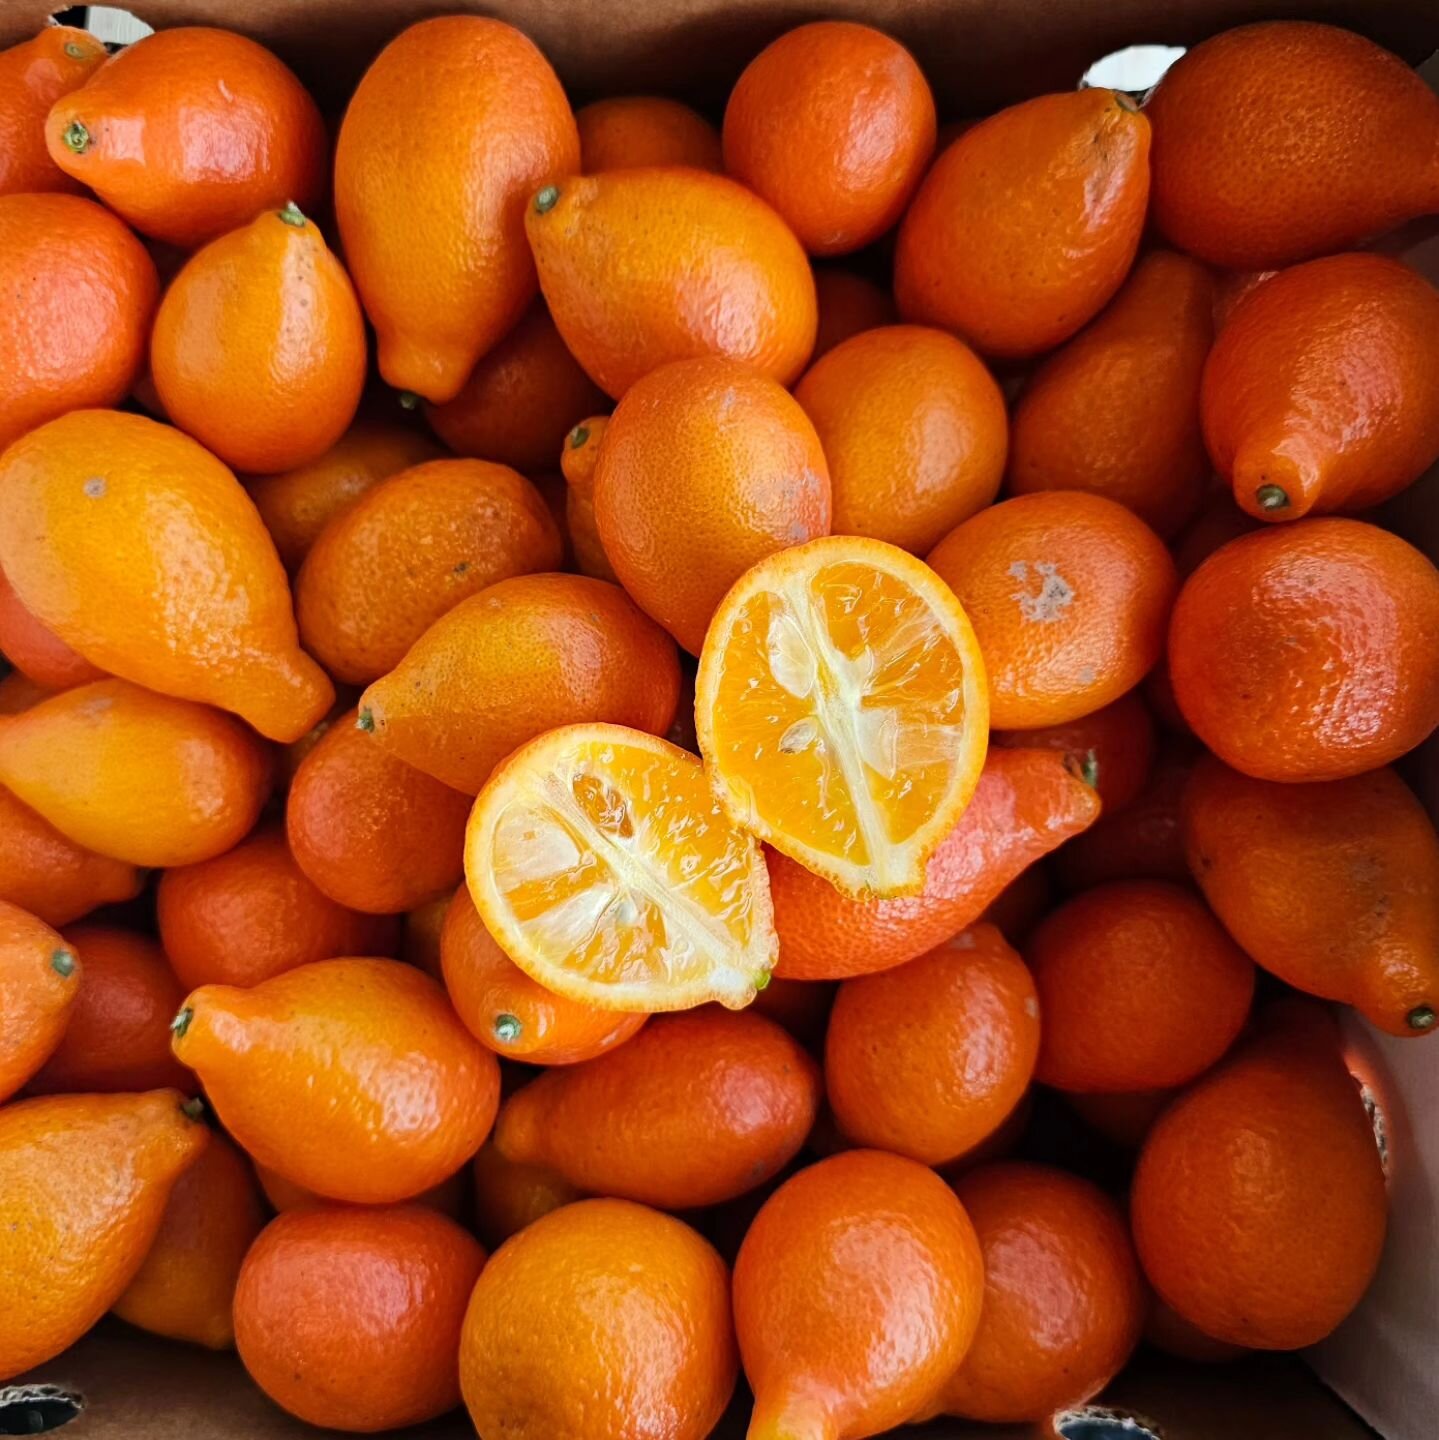 Mandarinquats are a cross between a Meiwa kumquat and a mandarin. They are a fun bell shape, larger than your average kumquat and they have an edible sweet peel and tart flesh. Take a bite out of this juicy kumquat or cut into slices to add to salads